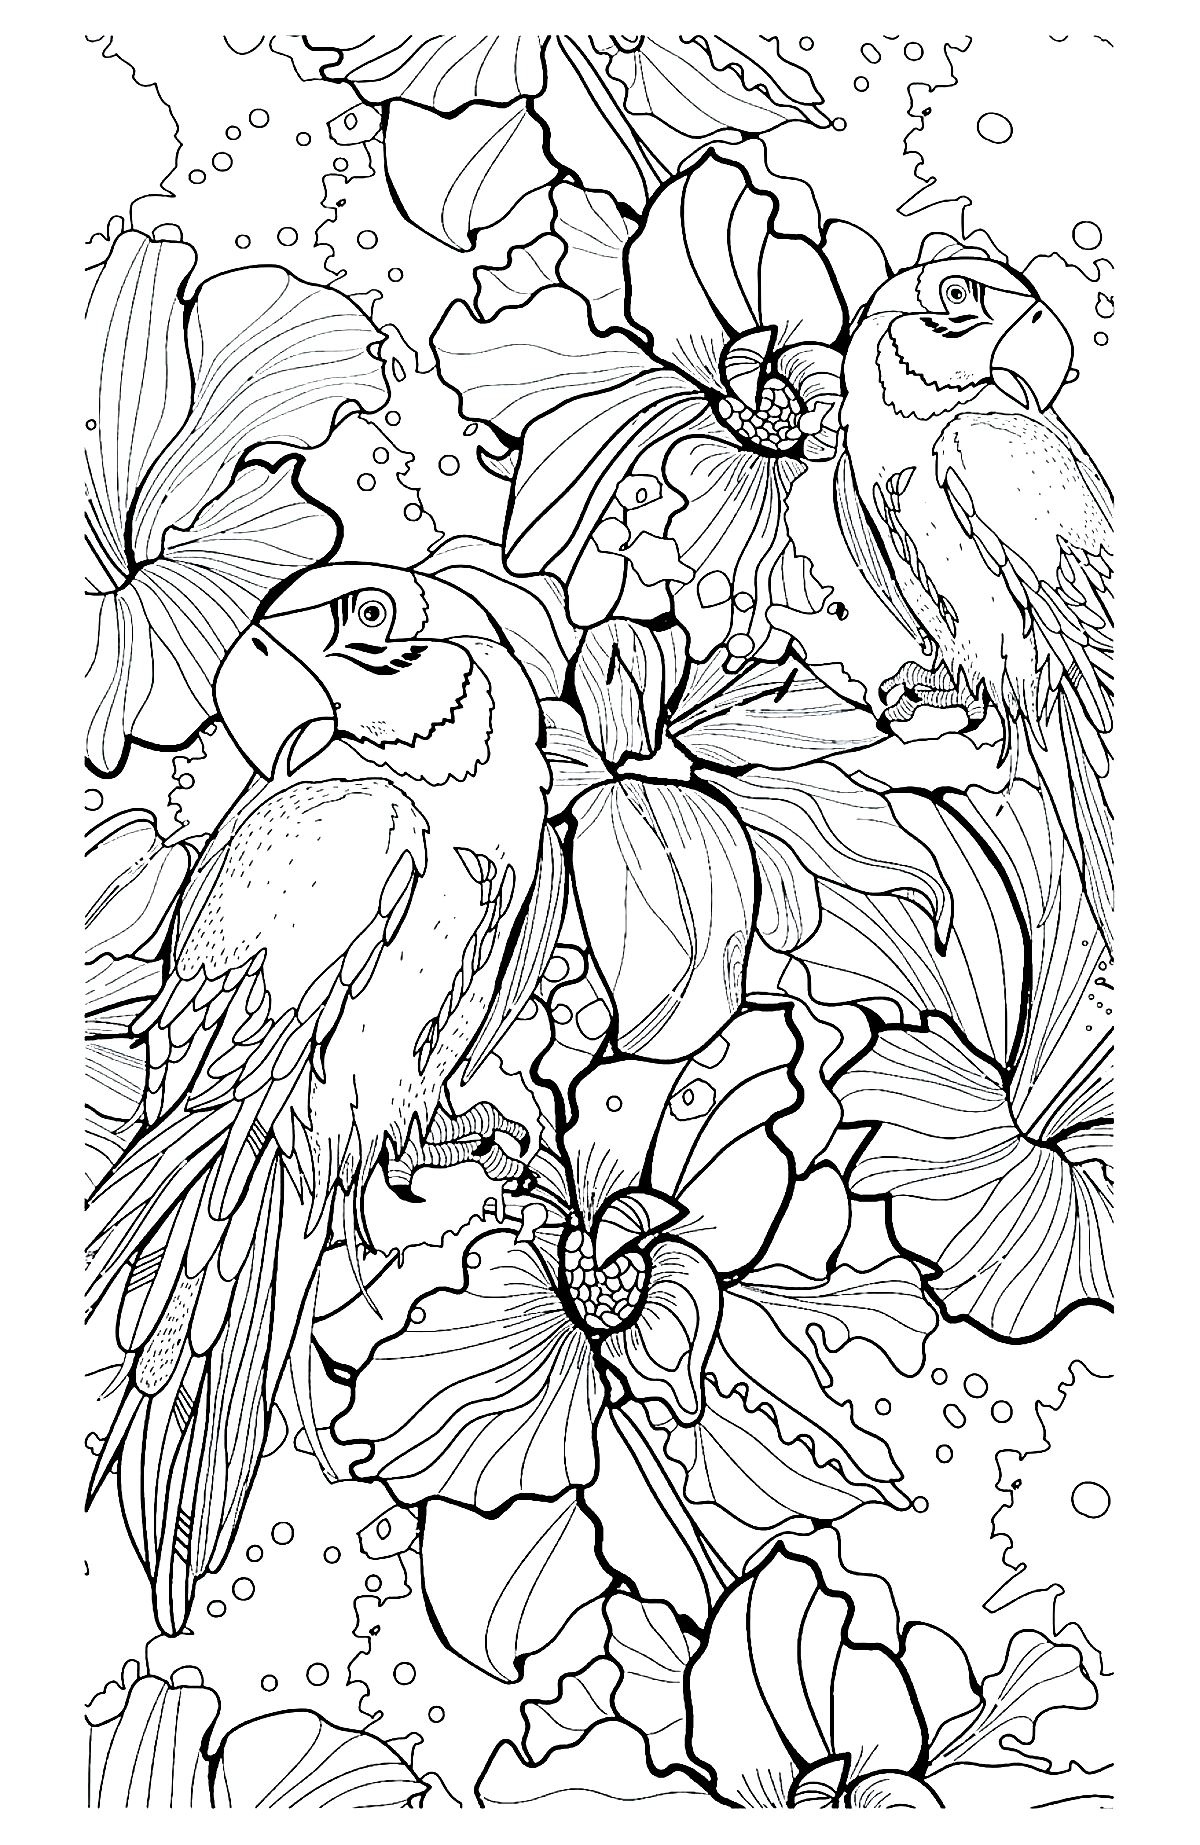 Animal - Coloring Pages for adults - Page 5